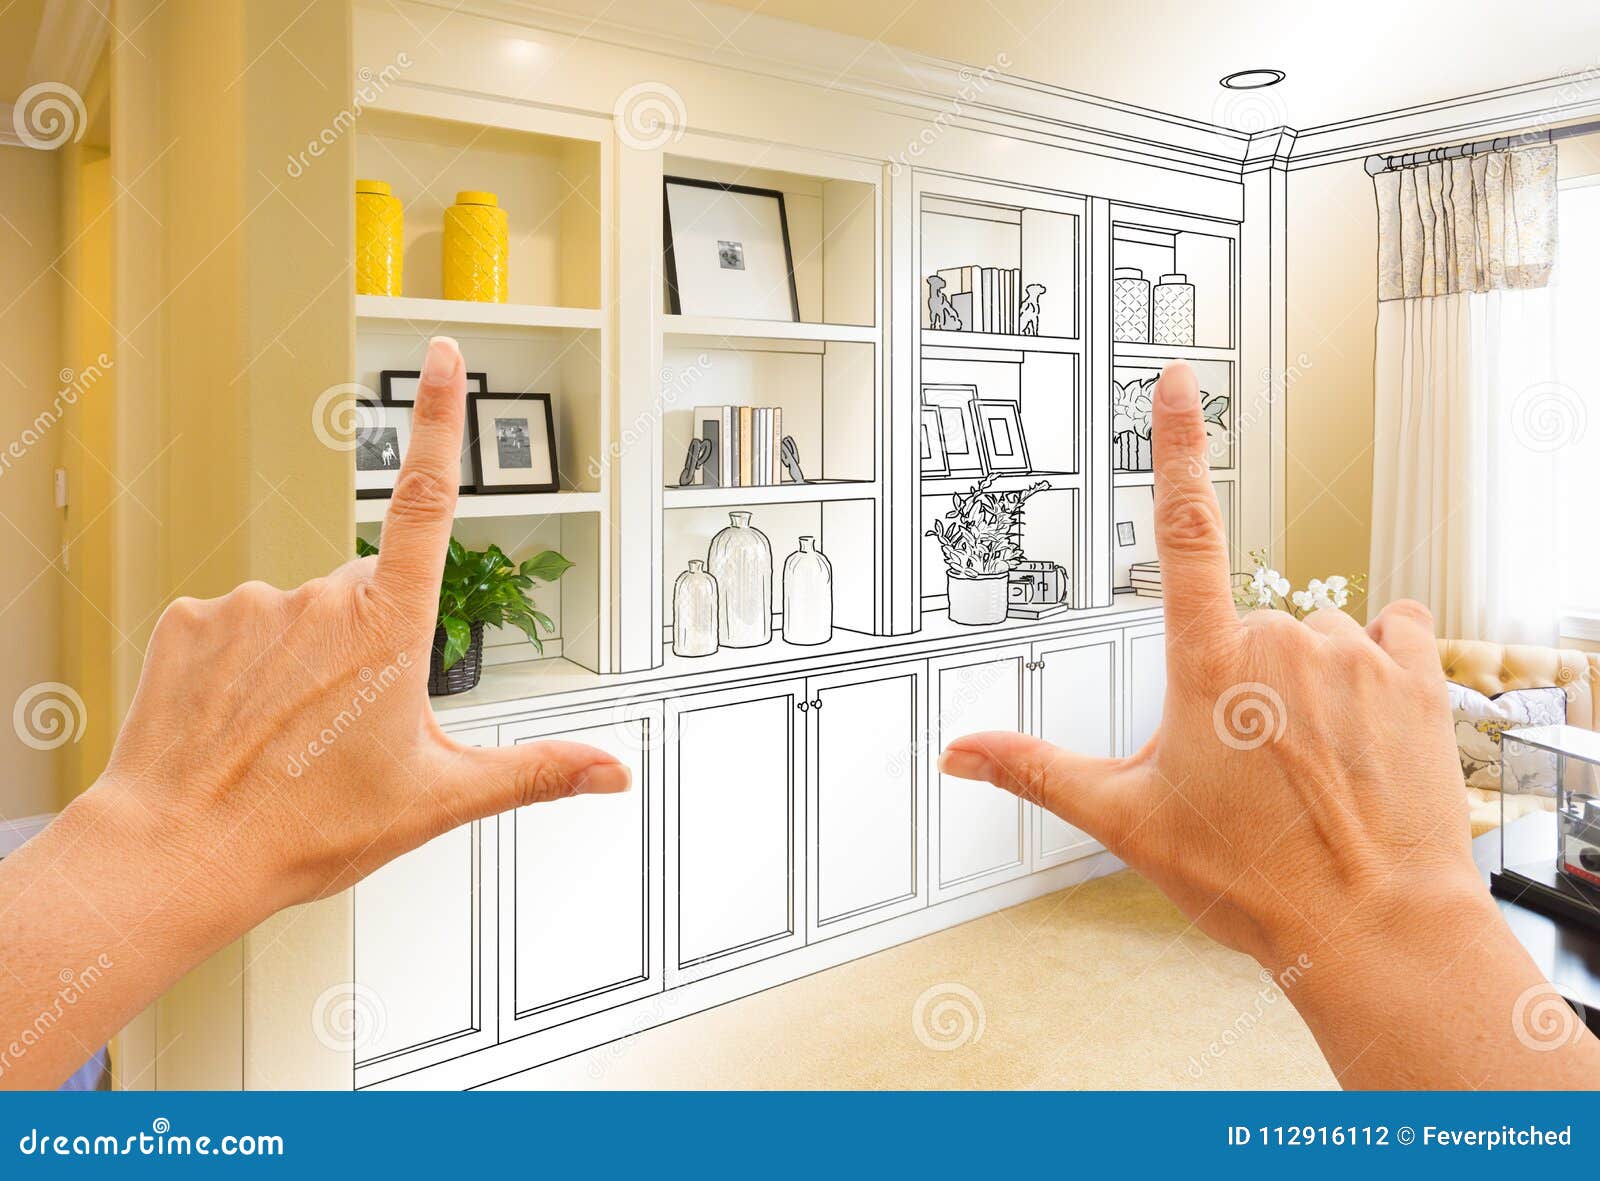 Hands Framing Custom Built In Shelves And Cabinets Design Drawing